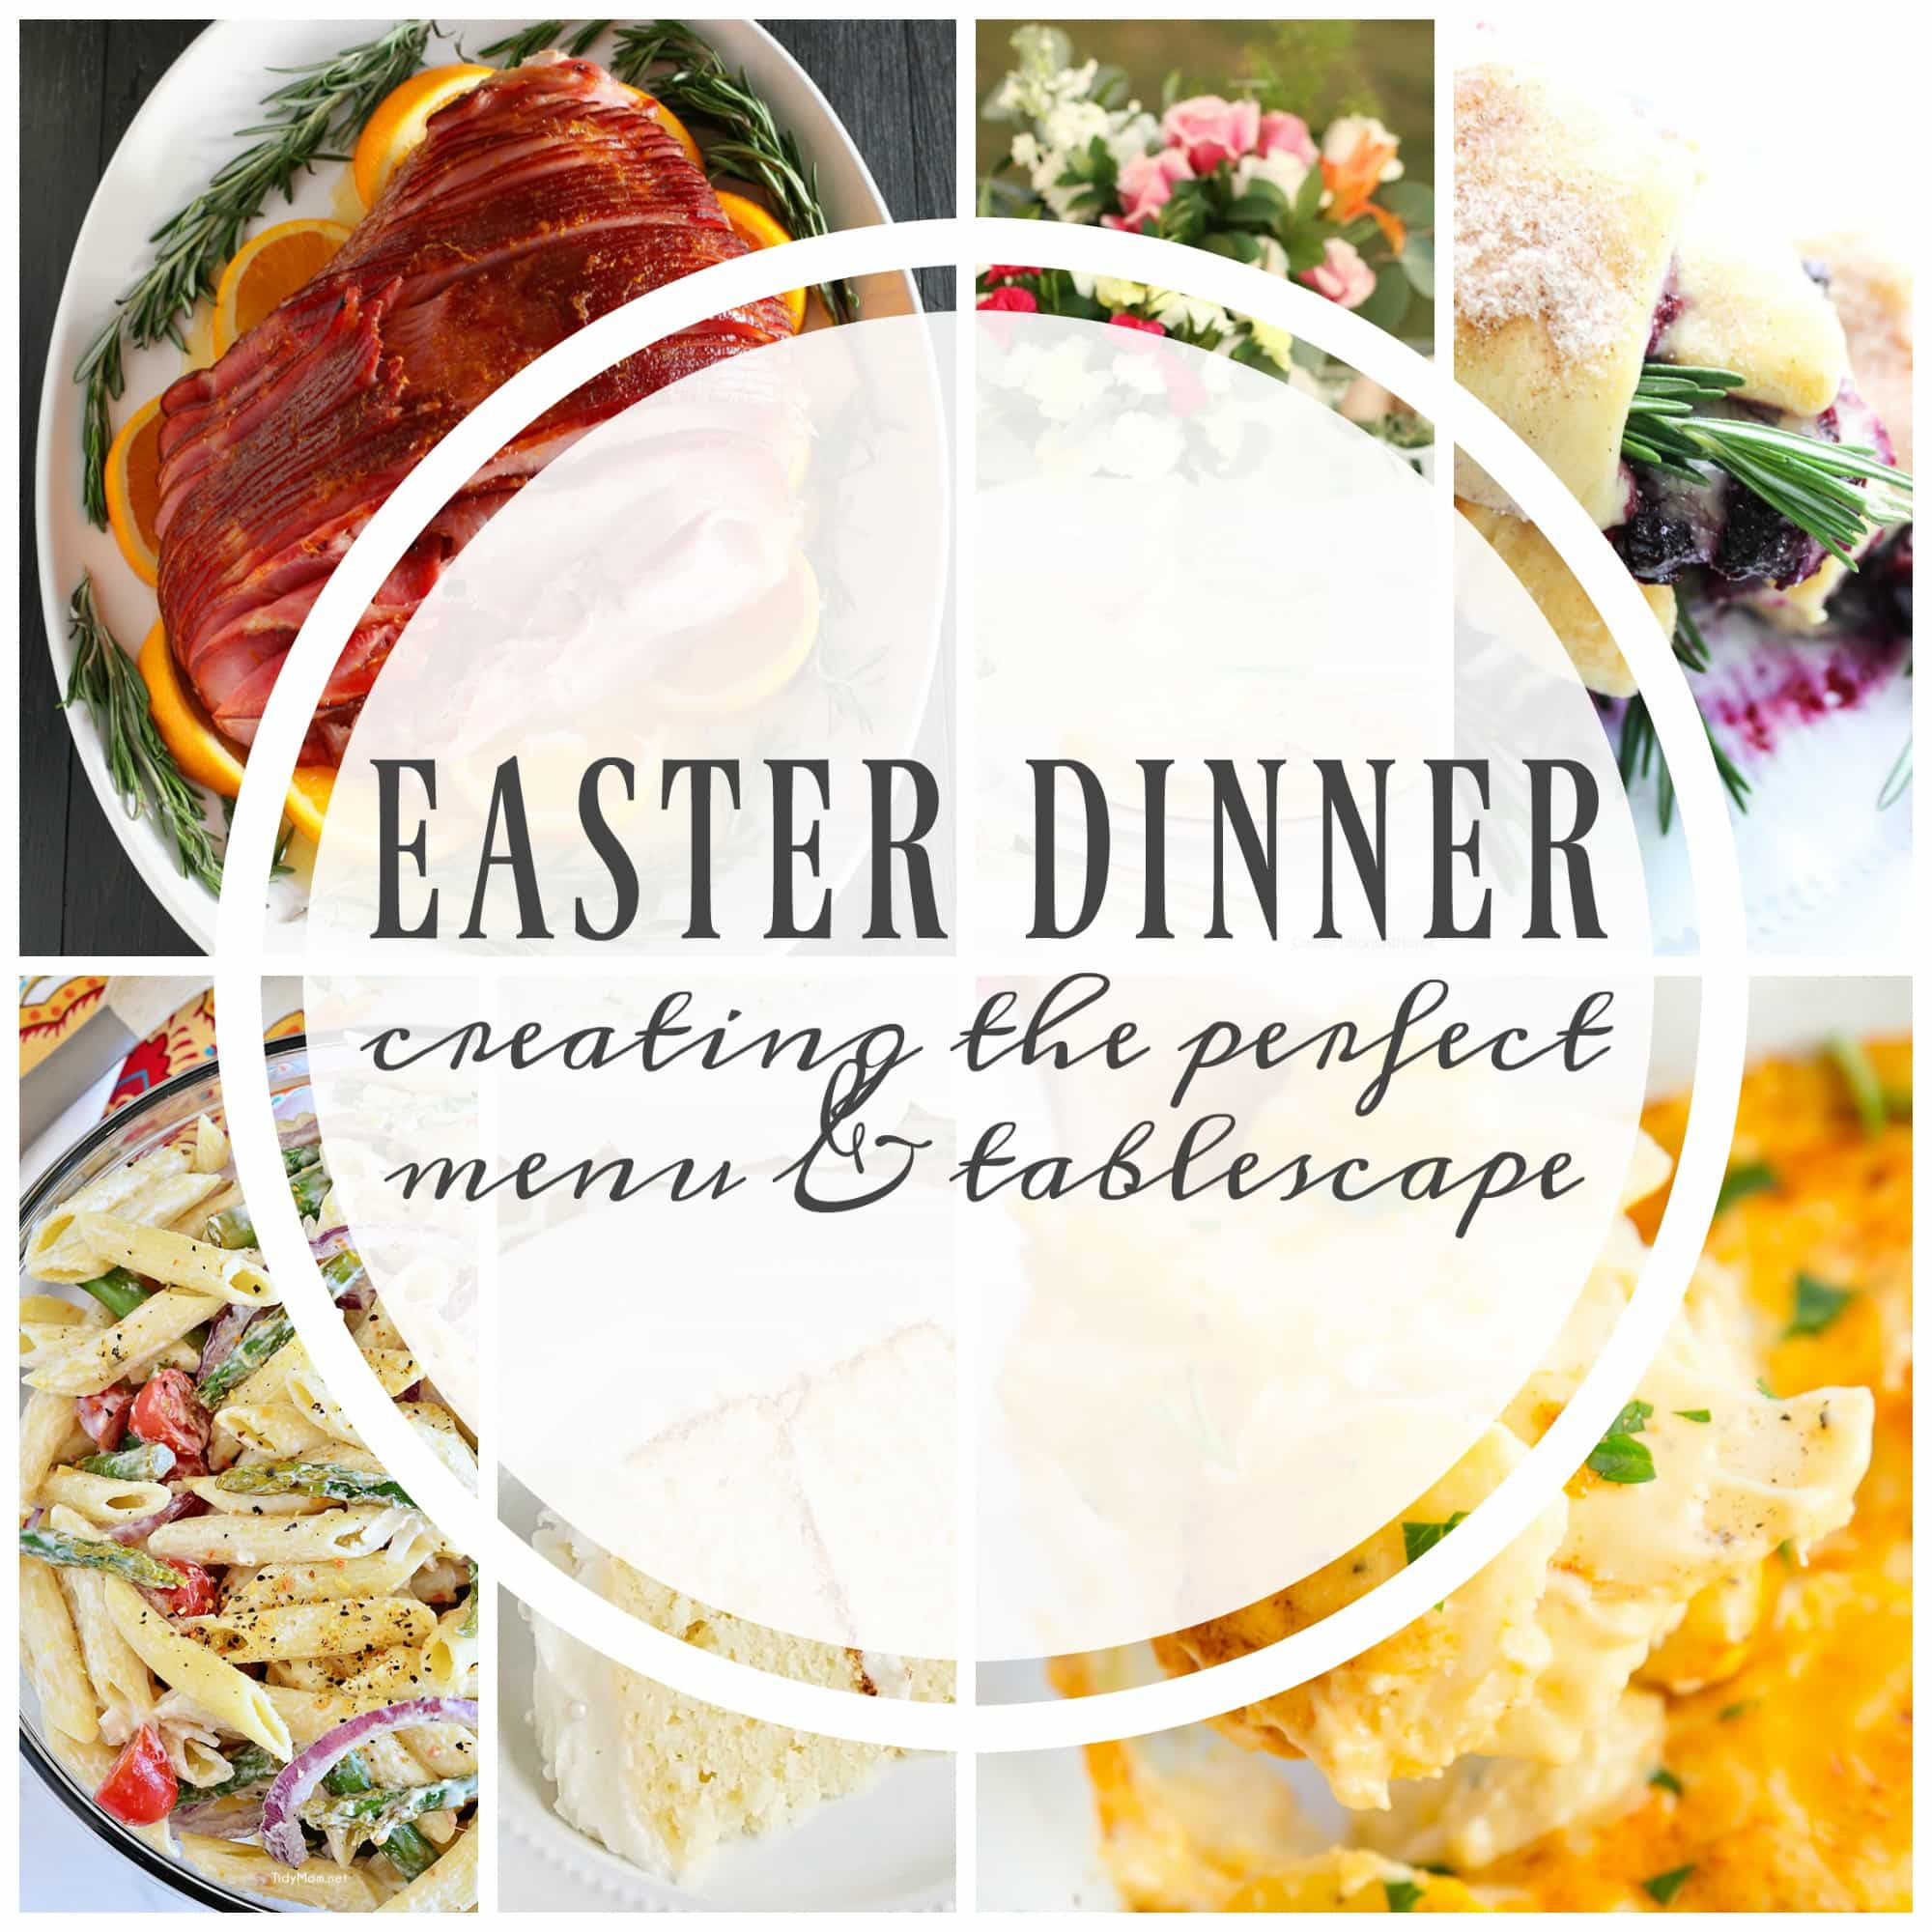 Menu For Easter Dinner
 EASTER DINNER CREATING THE PERFECT MENU & TABLESCAPE A